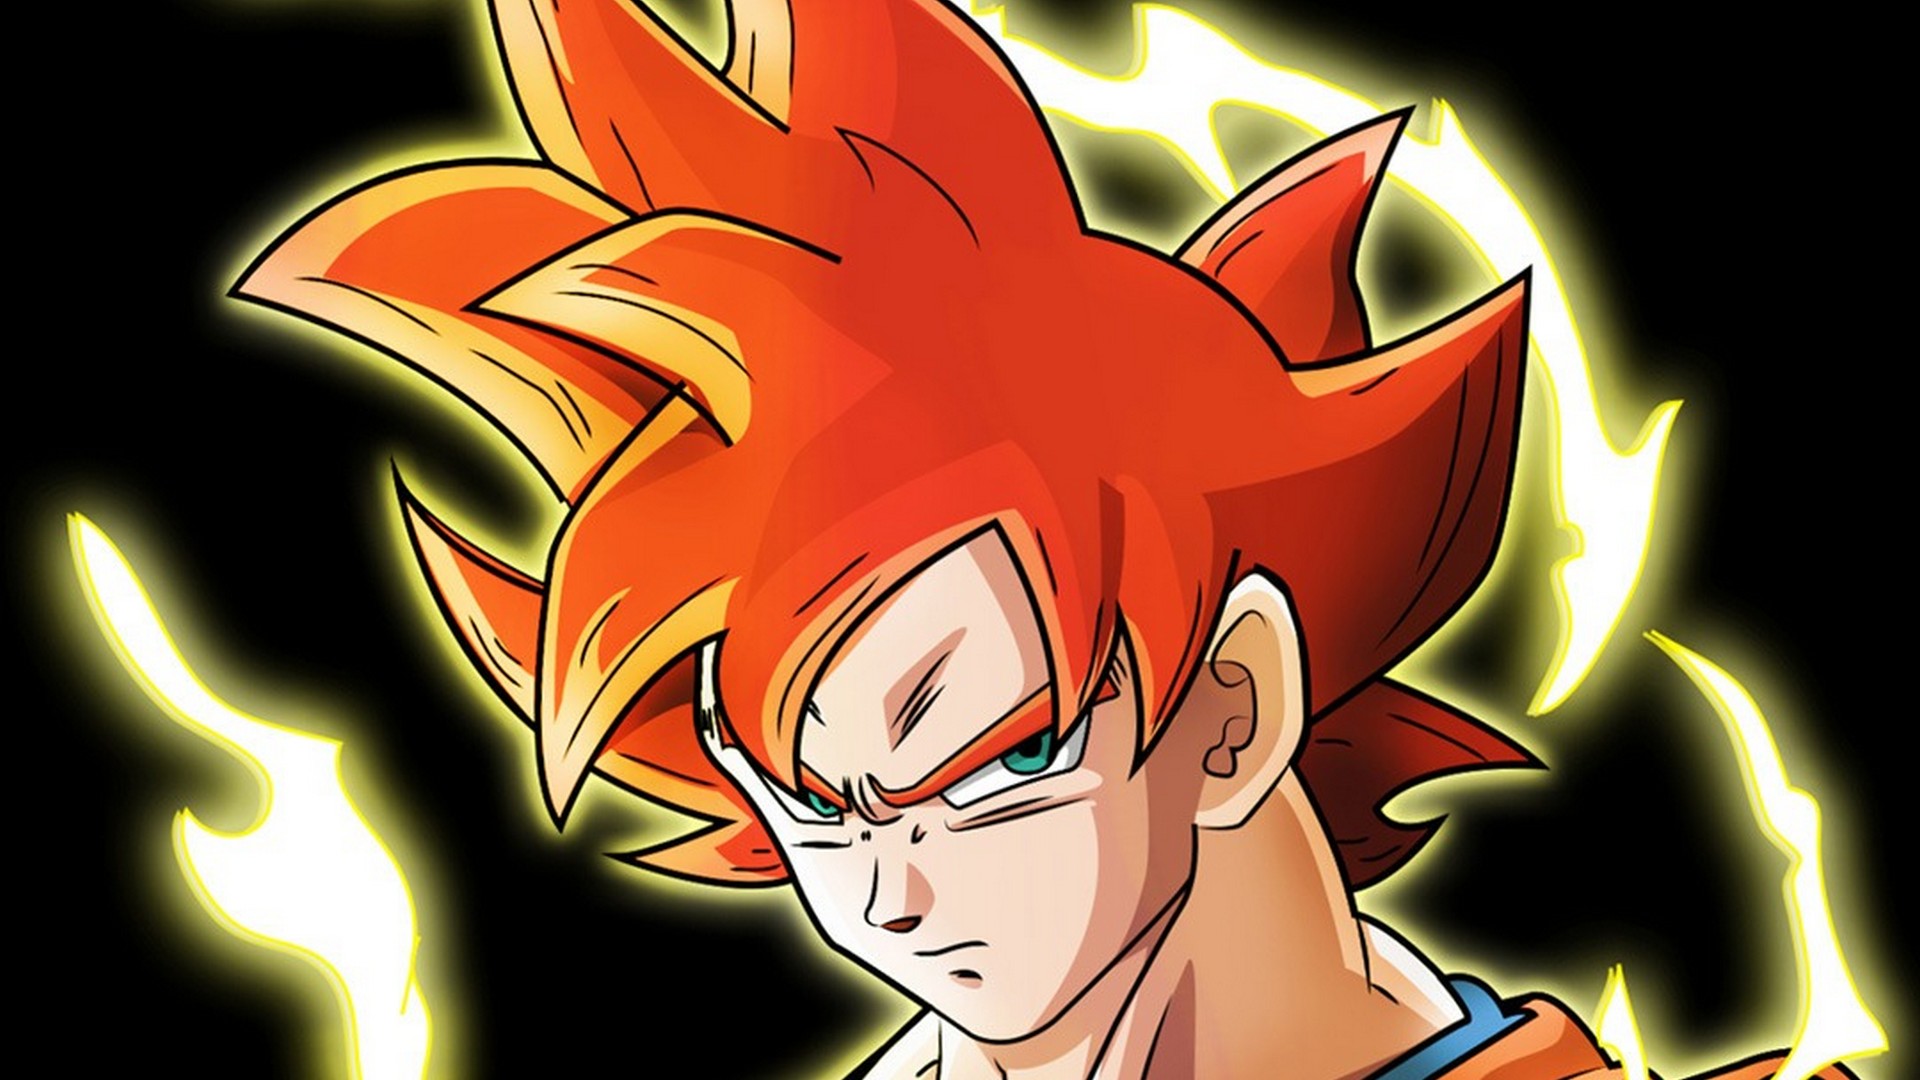 Goku Super Saiyan God Background Wallpaper HD With Resolution 1920X1080 pixel. You can make this wallpaper for your Desktop Computer Backgrounds, Mac Wallpapers, Android Lock screen or iPhone Screensavers